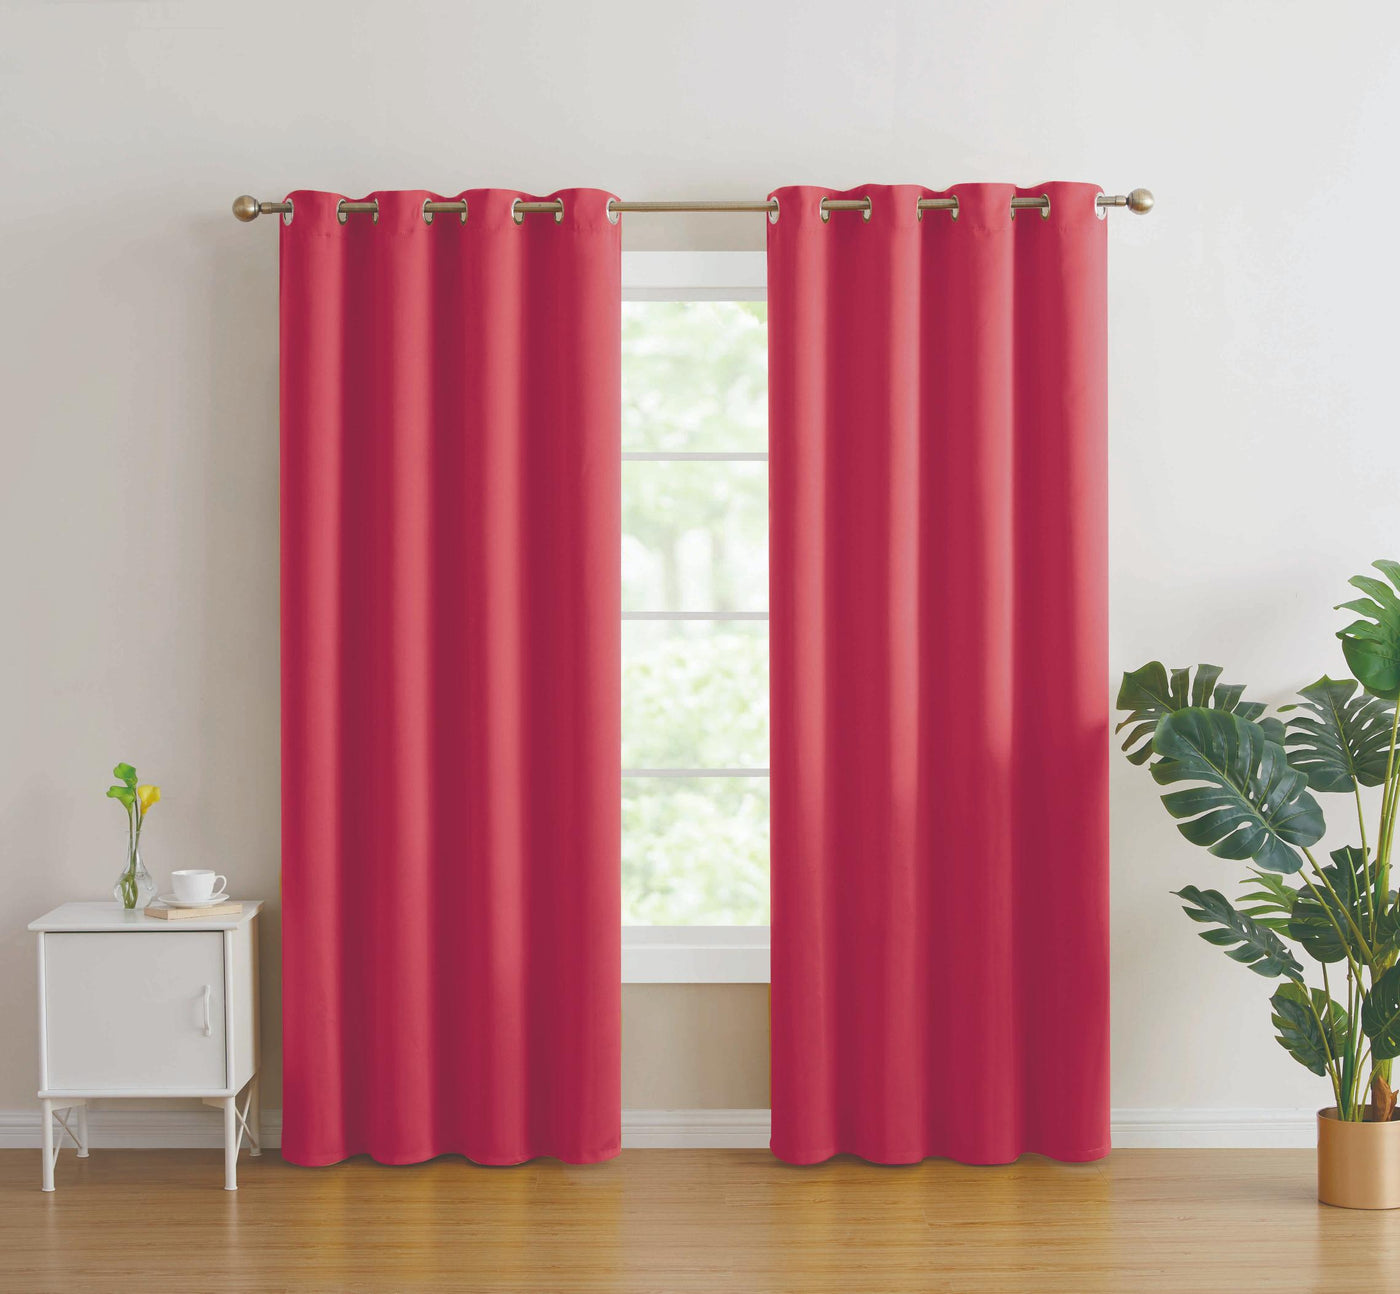 2pc Solid Grommet Thermal Insulated Window Curtain Panels Room Darkening Blackout 95" | Jenin Home Furnishing.